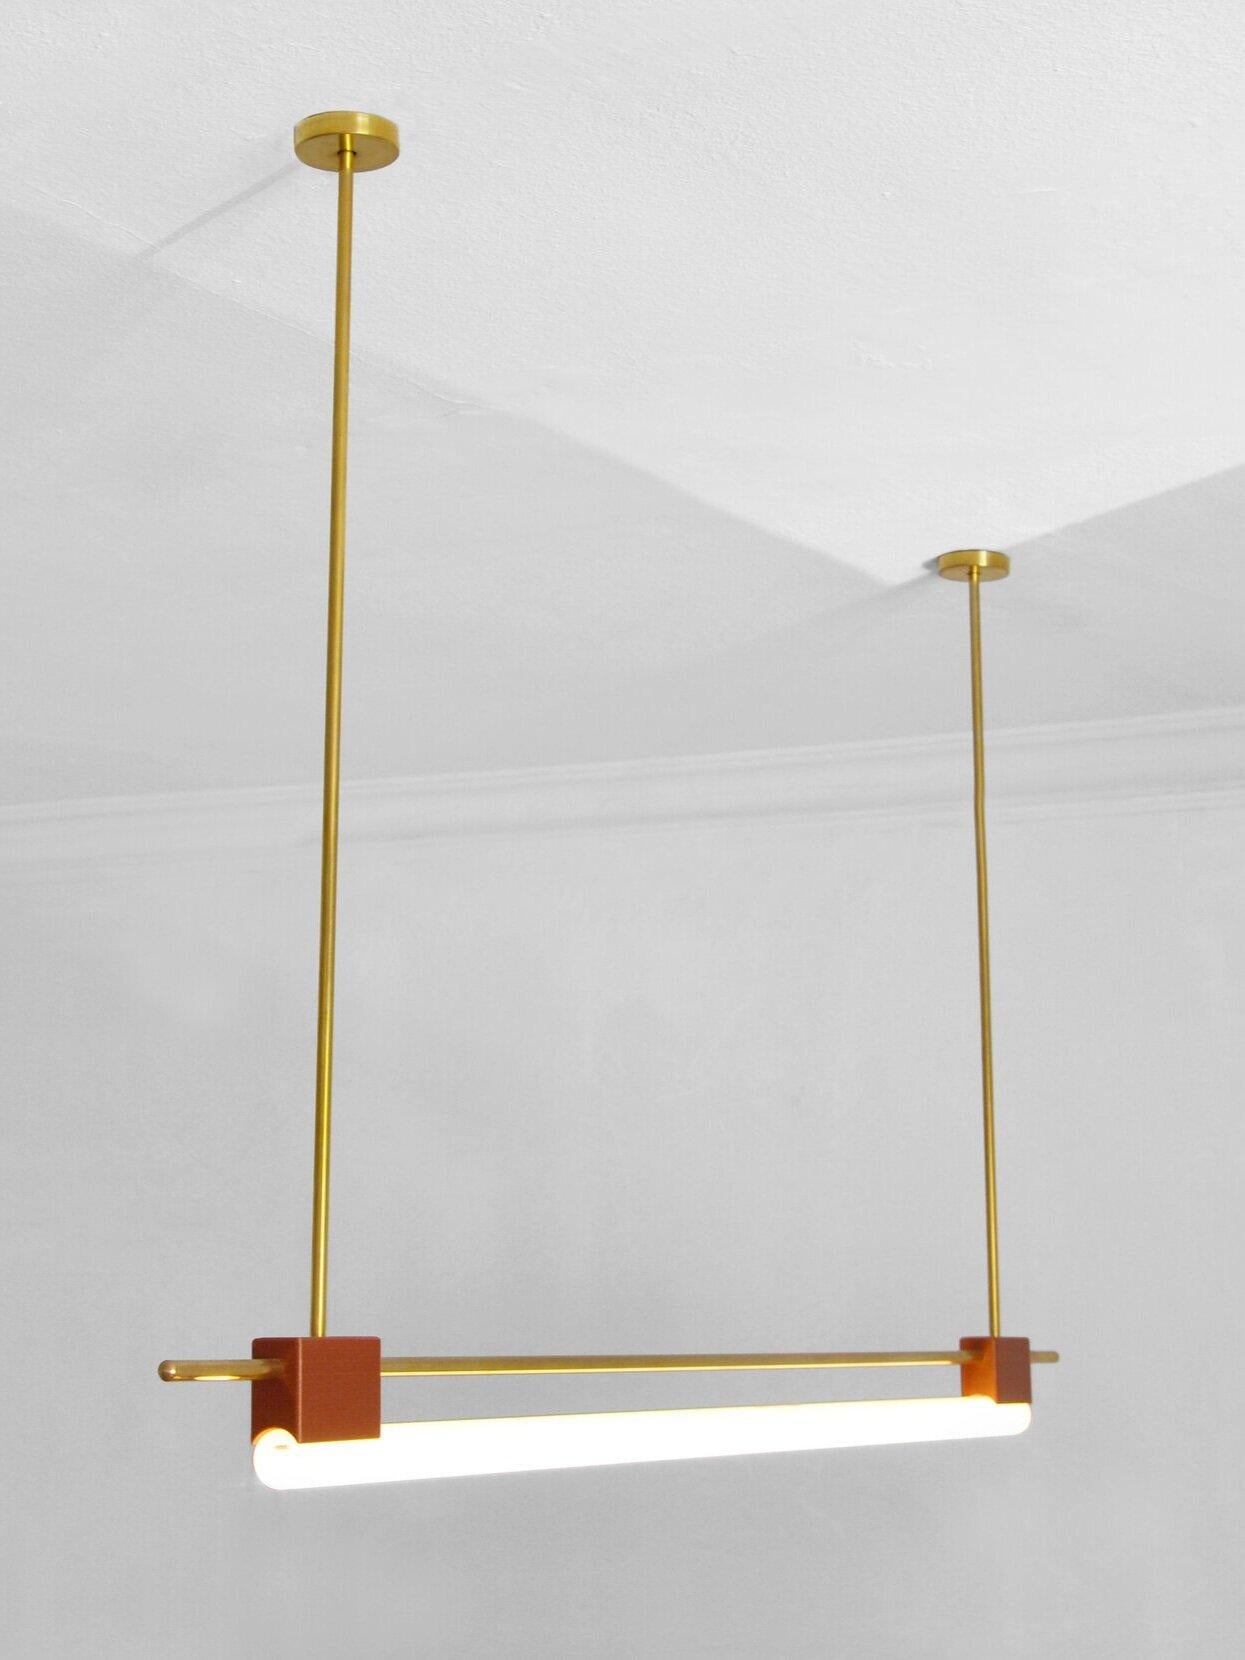 Tubus pendant by Contain
Dimensions: D 120 x W 100 (custom length) x H 3 cm 
Materials: brass and 3D printed PLA structure.
Available in different finishes. 

All our lamps can be wired according to each country. If sold to the USA it will be